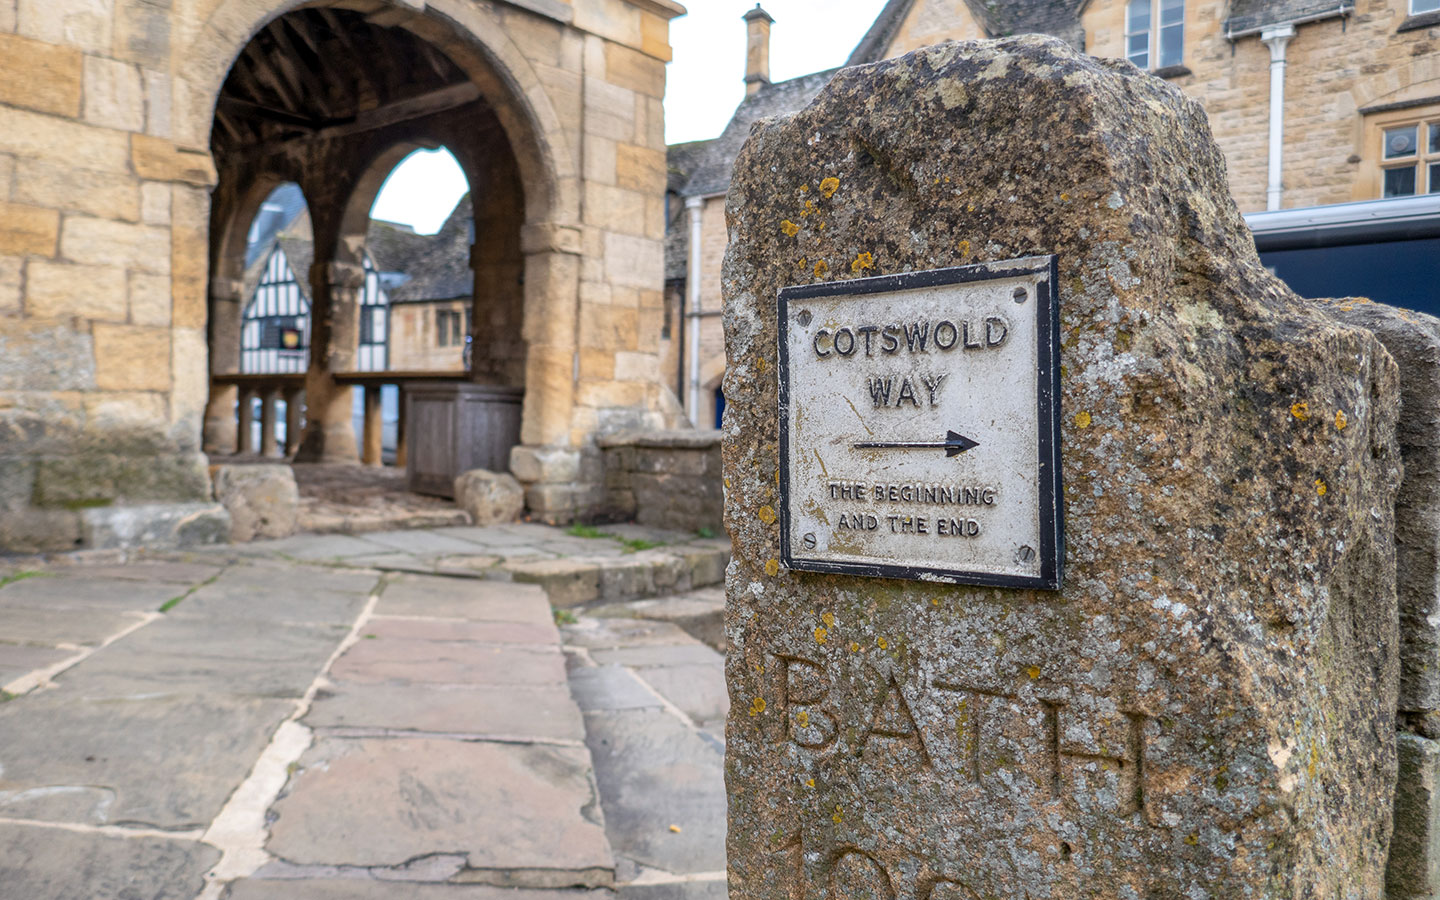 Cotswold Way arker stone by the Market Hall in Chipping Campden